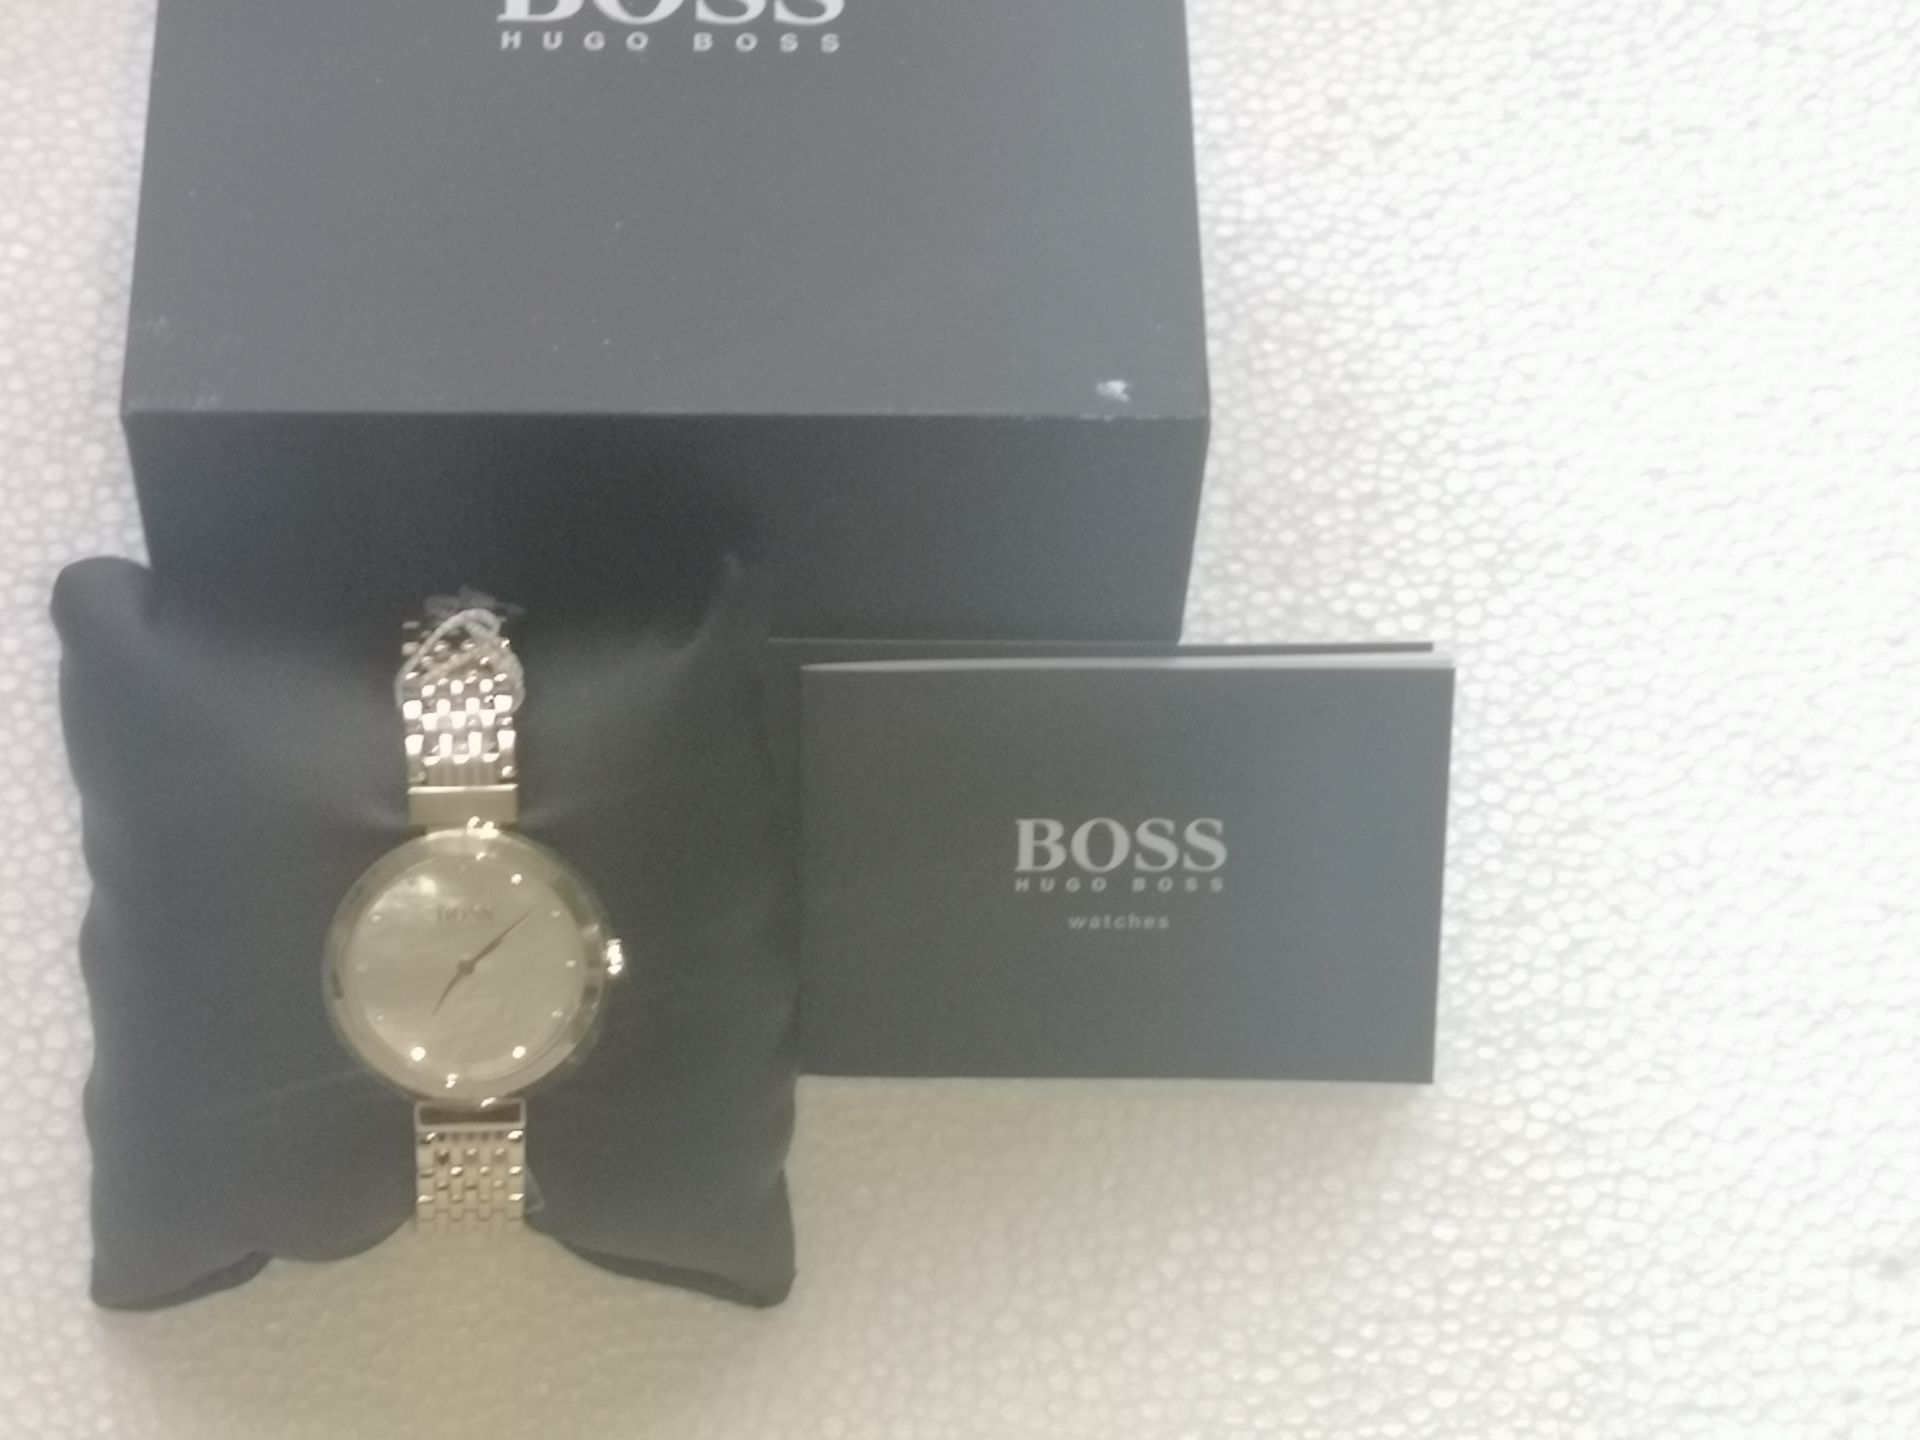 Hugo Boss Womens Analogue Classic Quartz With Stainless Steel Strap 1502479 Watch - Image 6 of 9